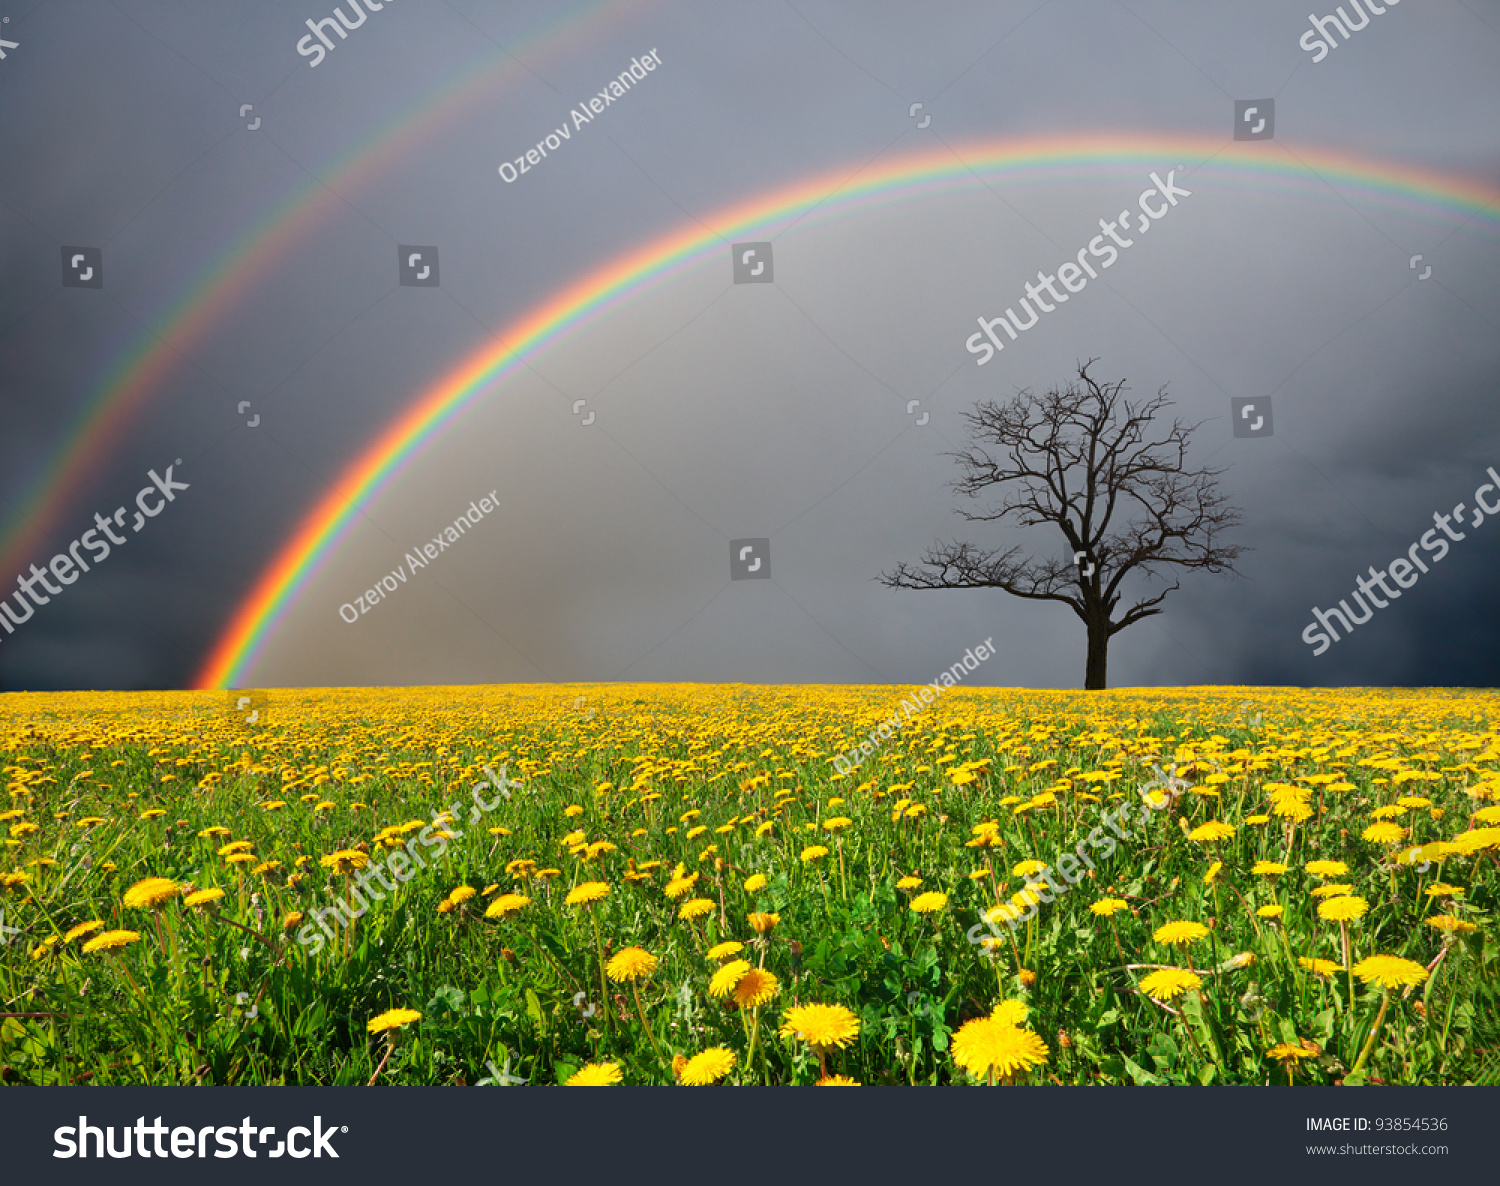 dandelion field and dead tree under cloudy sky with rainbow #93854536